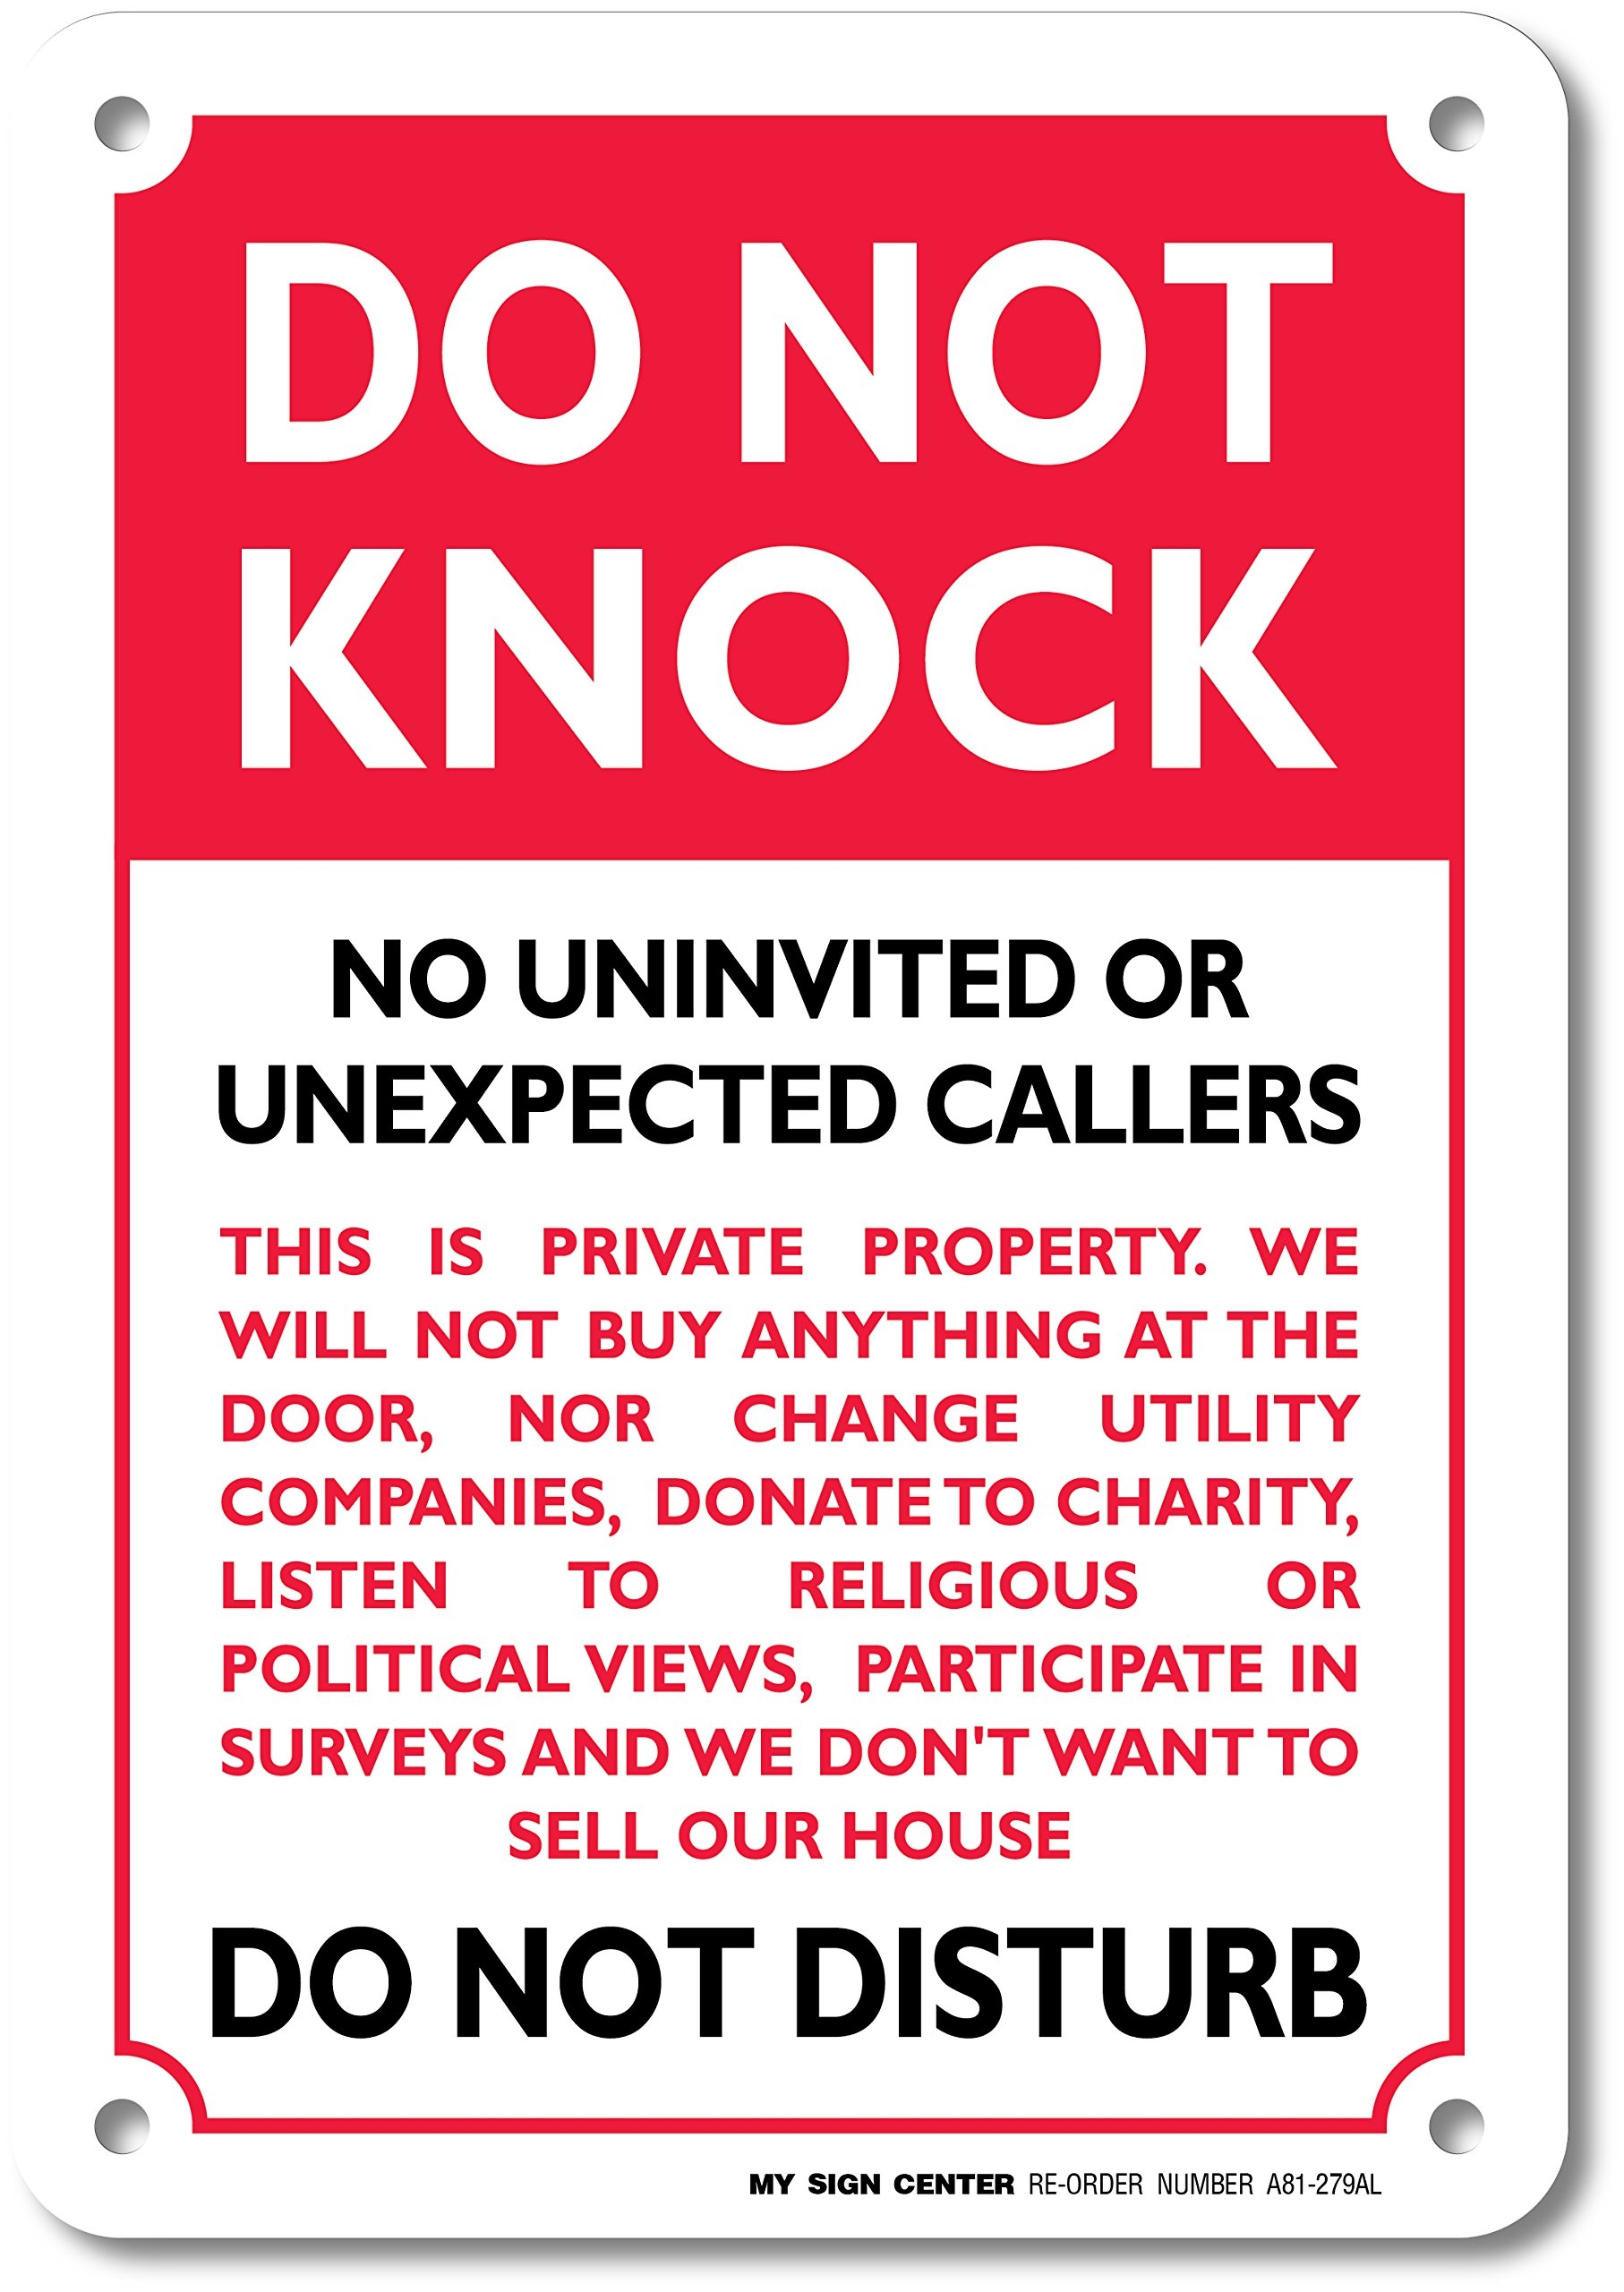 Amazon Do Not Knock No Uninvited Or Unexpected Callers Do Not Disturb Sign 7 X 10 0 40 Aluminum Fade Resistance Indoor Outdoor Use USA MADE By My Sign Center Red Patio Lawn